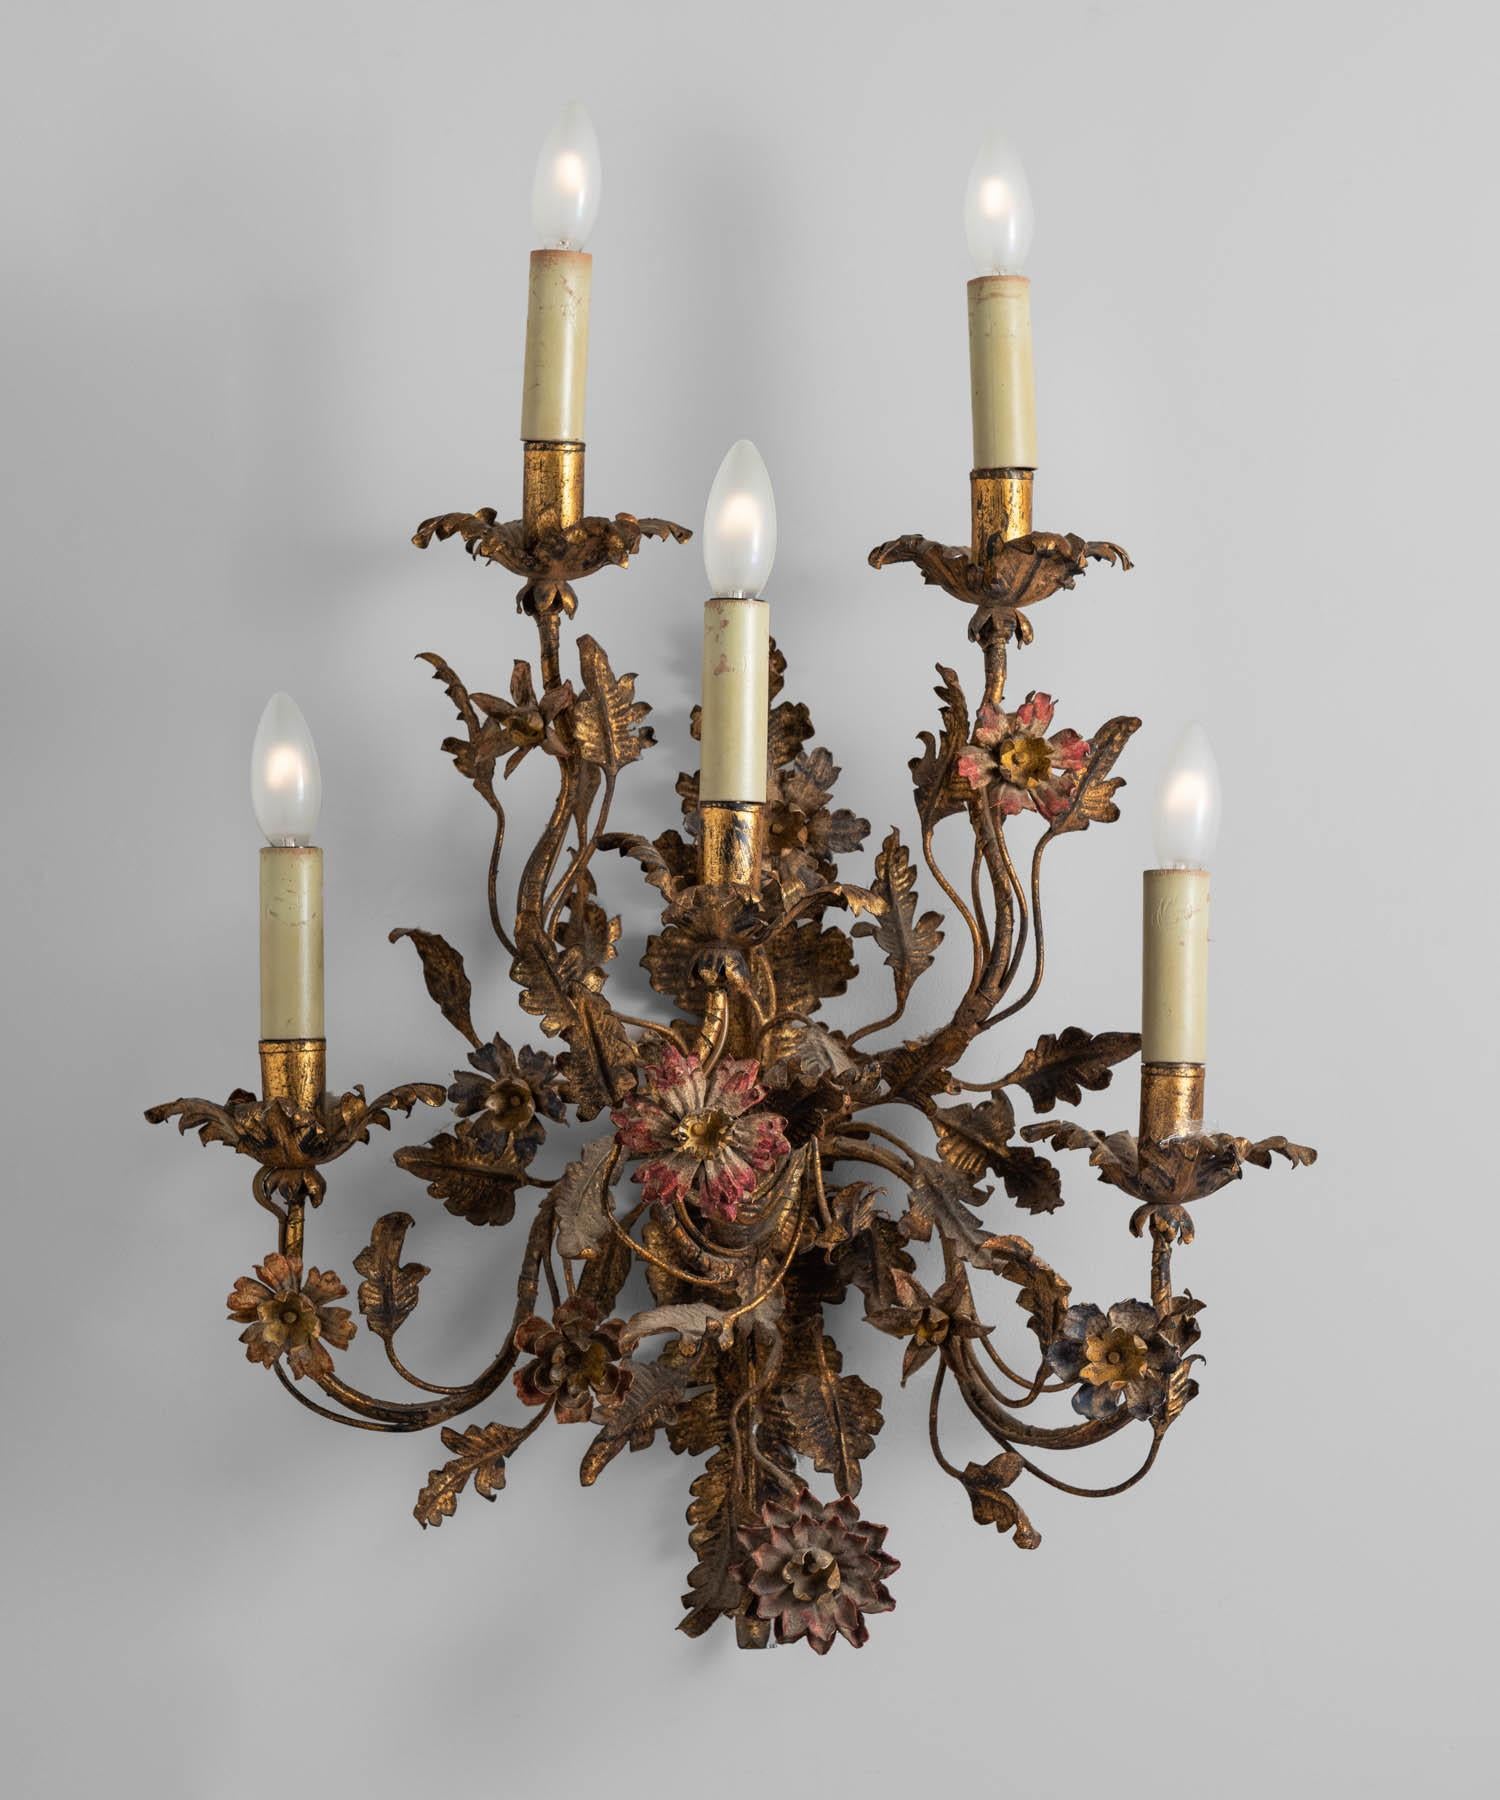 Brass floral sconce, Italy, circa 1910.

Intricate brass floral design holds (5) lights. Includes original red paint, wonderful patina, and detailing throughout.